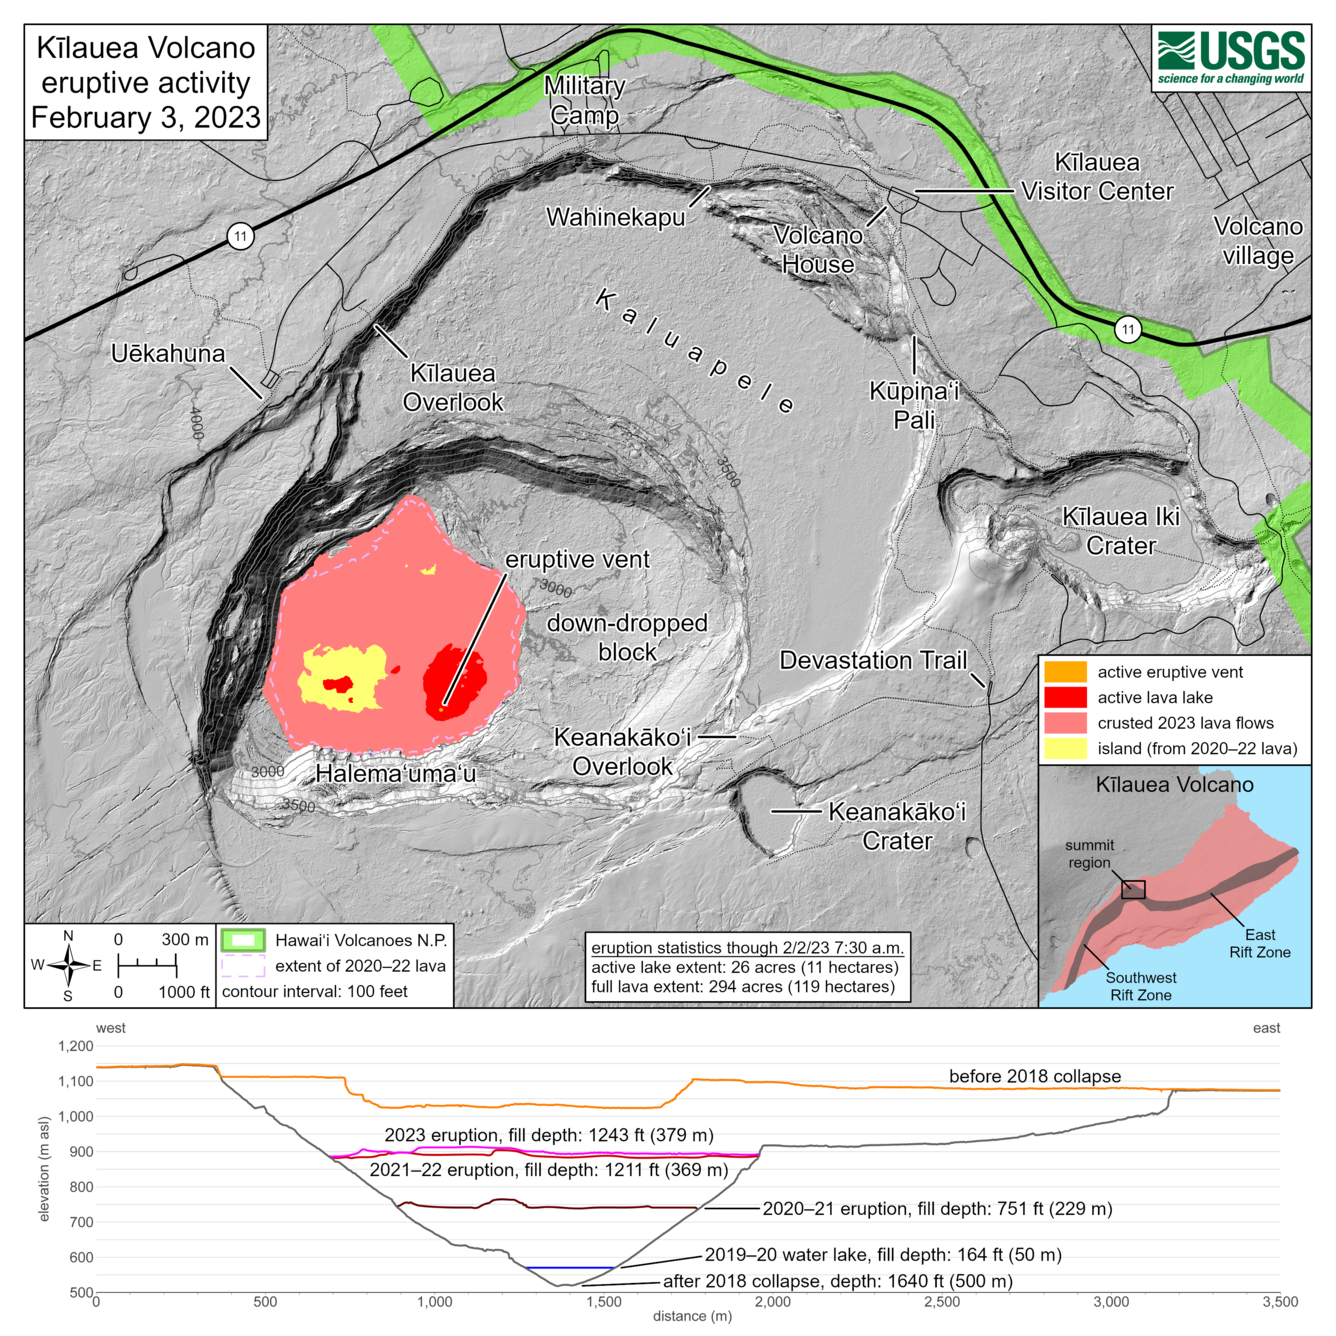 Map dated February 3, 2023 showing the size of the active and non active portions of the lava lake. Diagram on bottom showing how lava filled Halema'uma'u crater from 2018 to 2023.